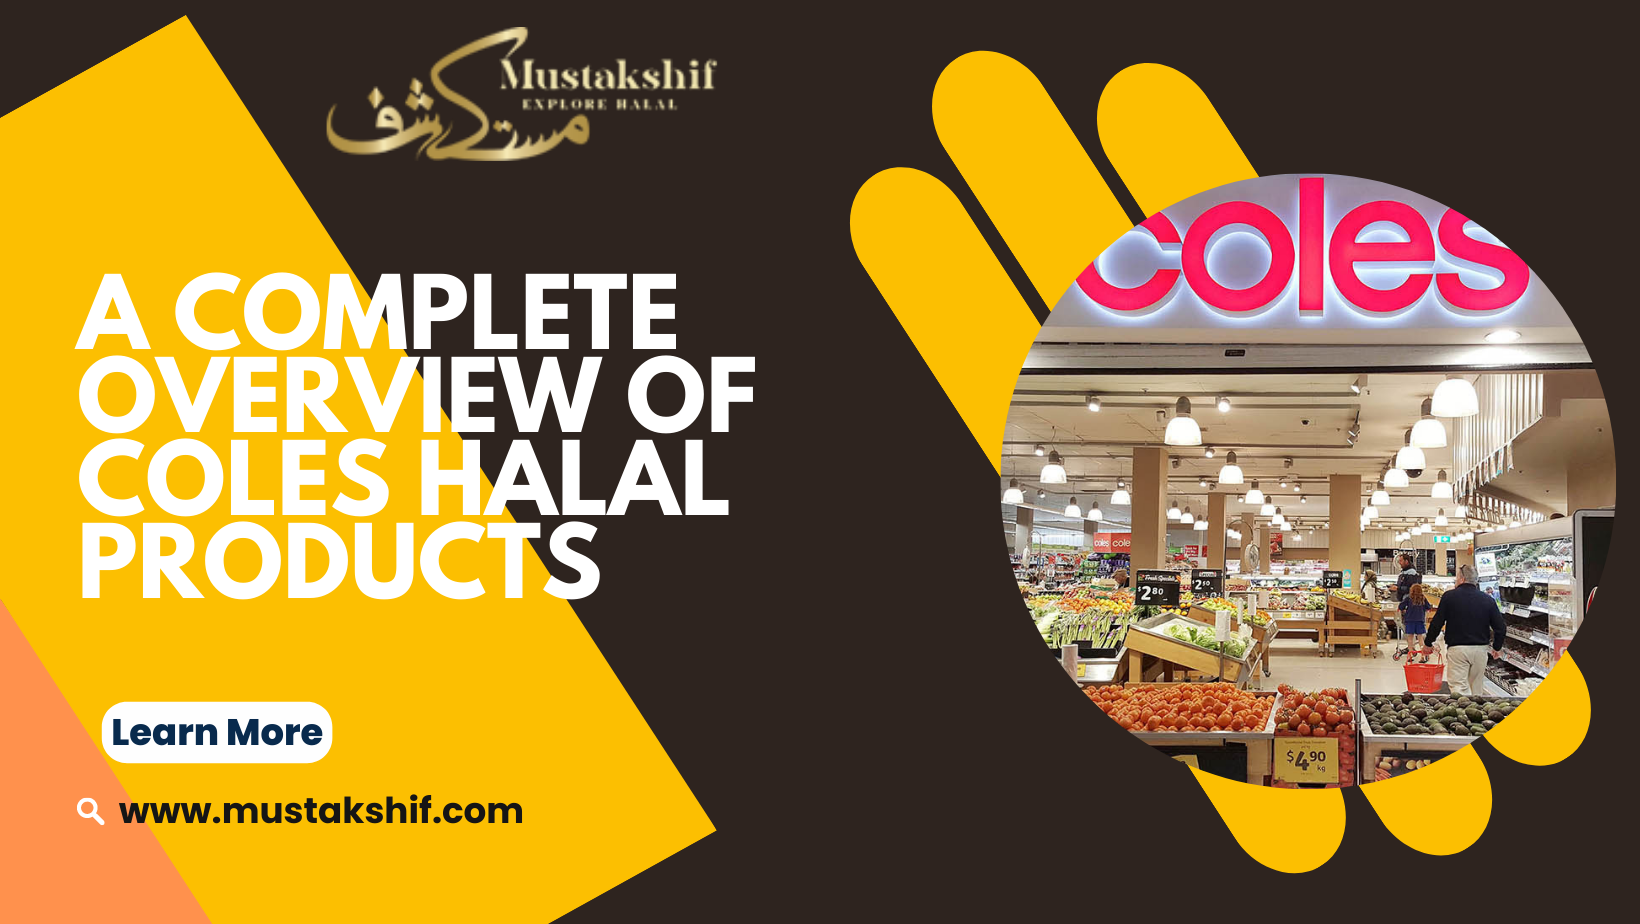 A Complete Overview of Coles Halal Products - AtoAllinks